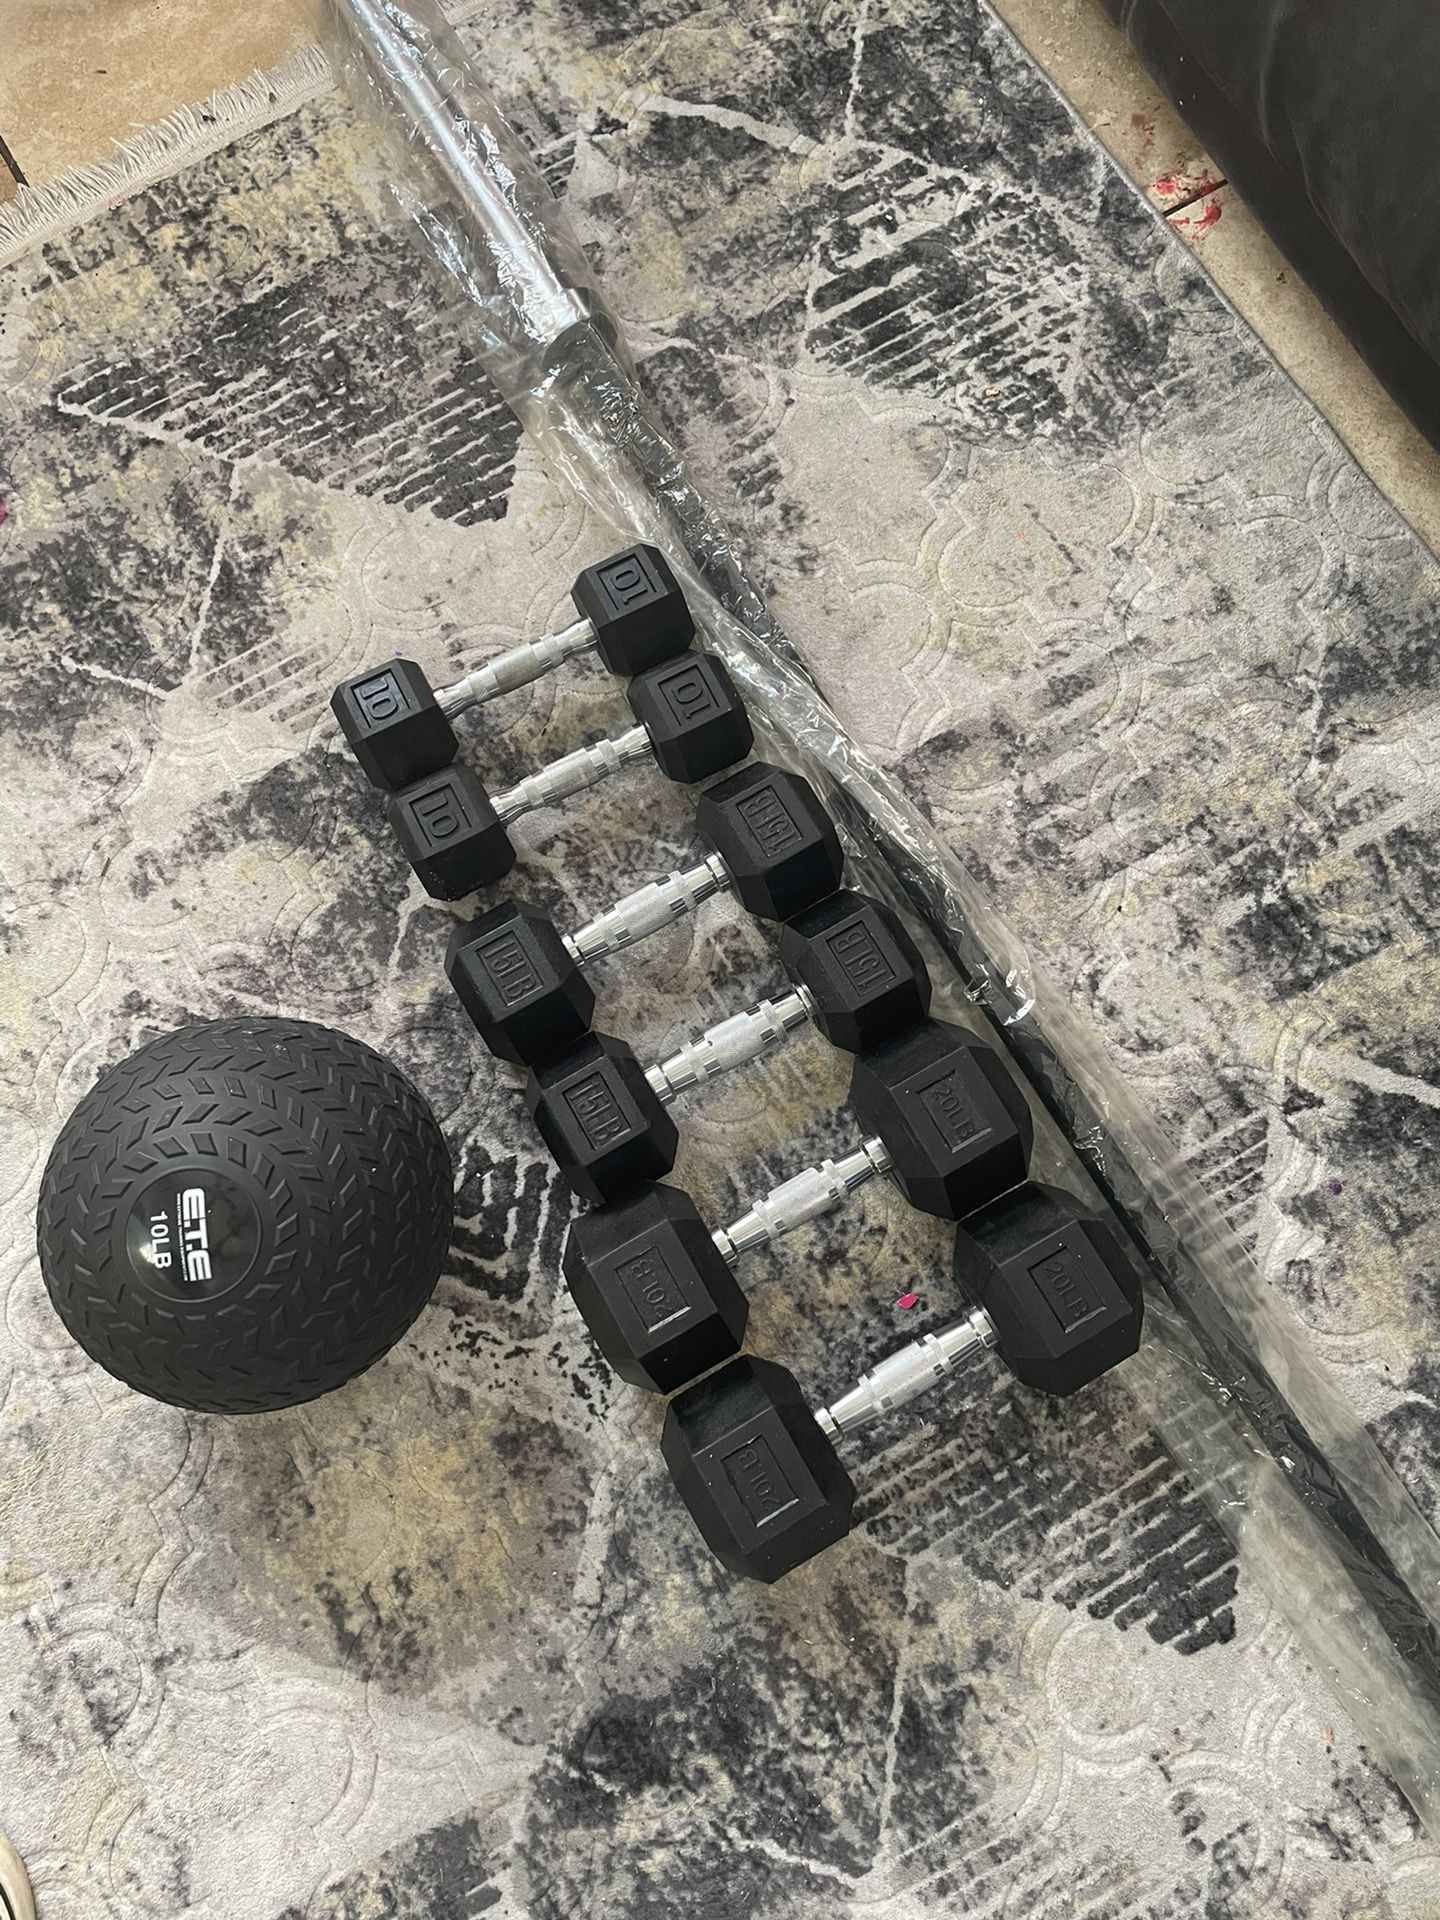 Bumper Weights, Dumbbells, Slam Balls, Olympic Barbell   PLEASE NOTE I AM ONLY LOOKING TO SELL EVERYTHING TOGETHER 